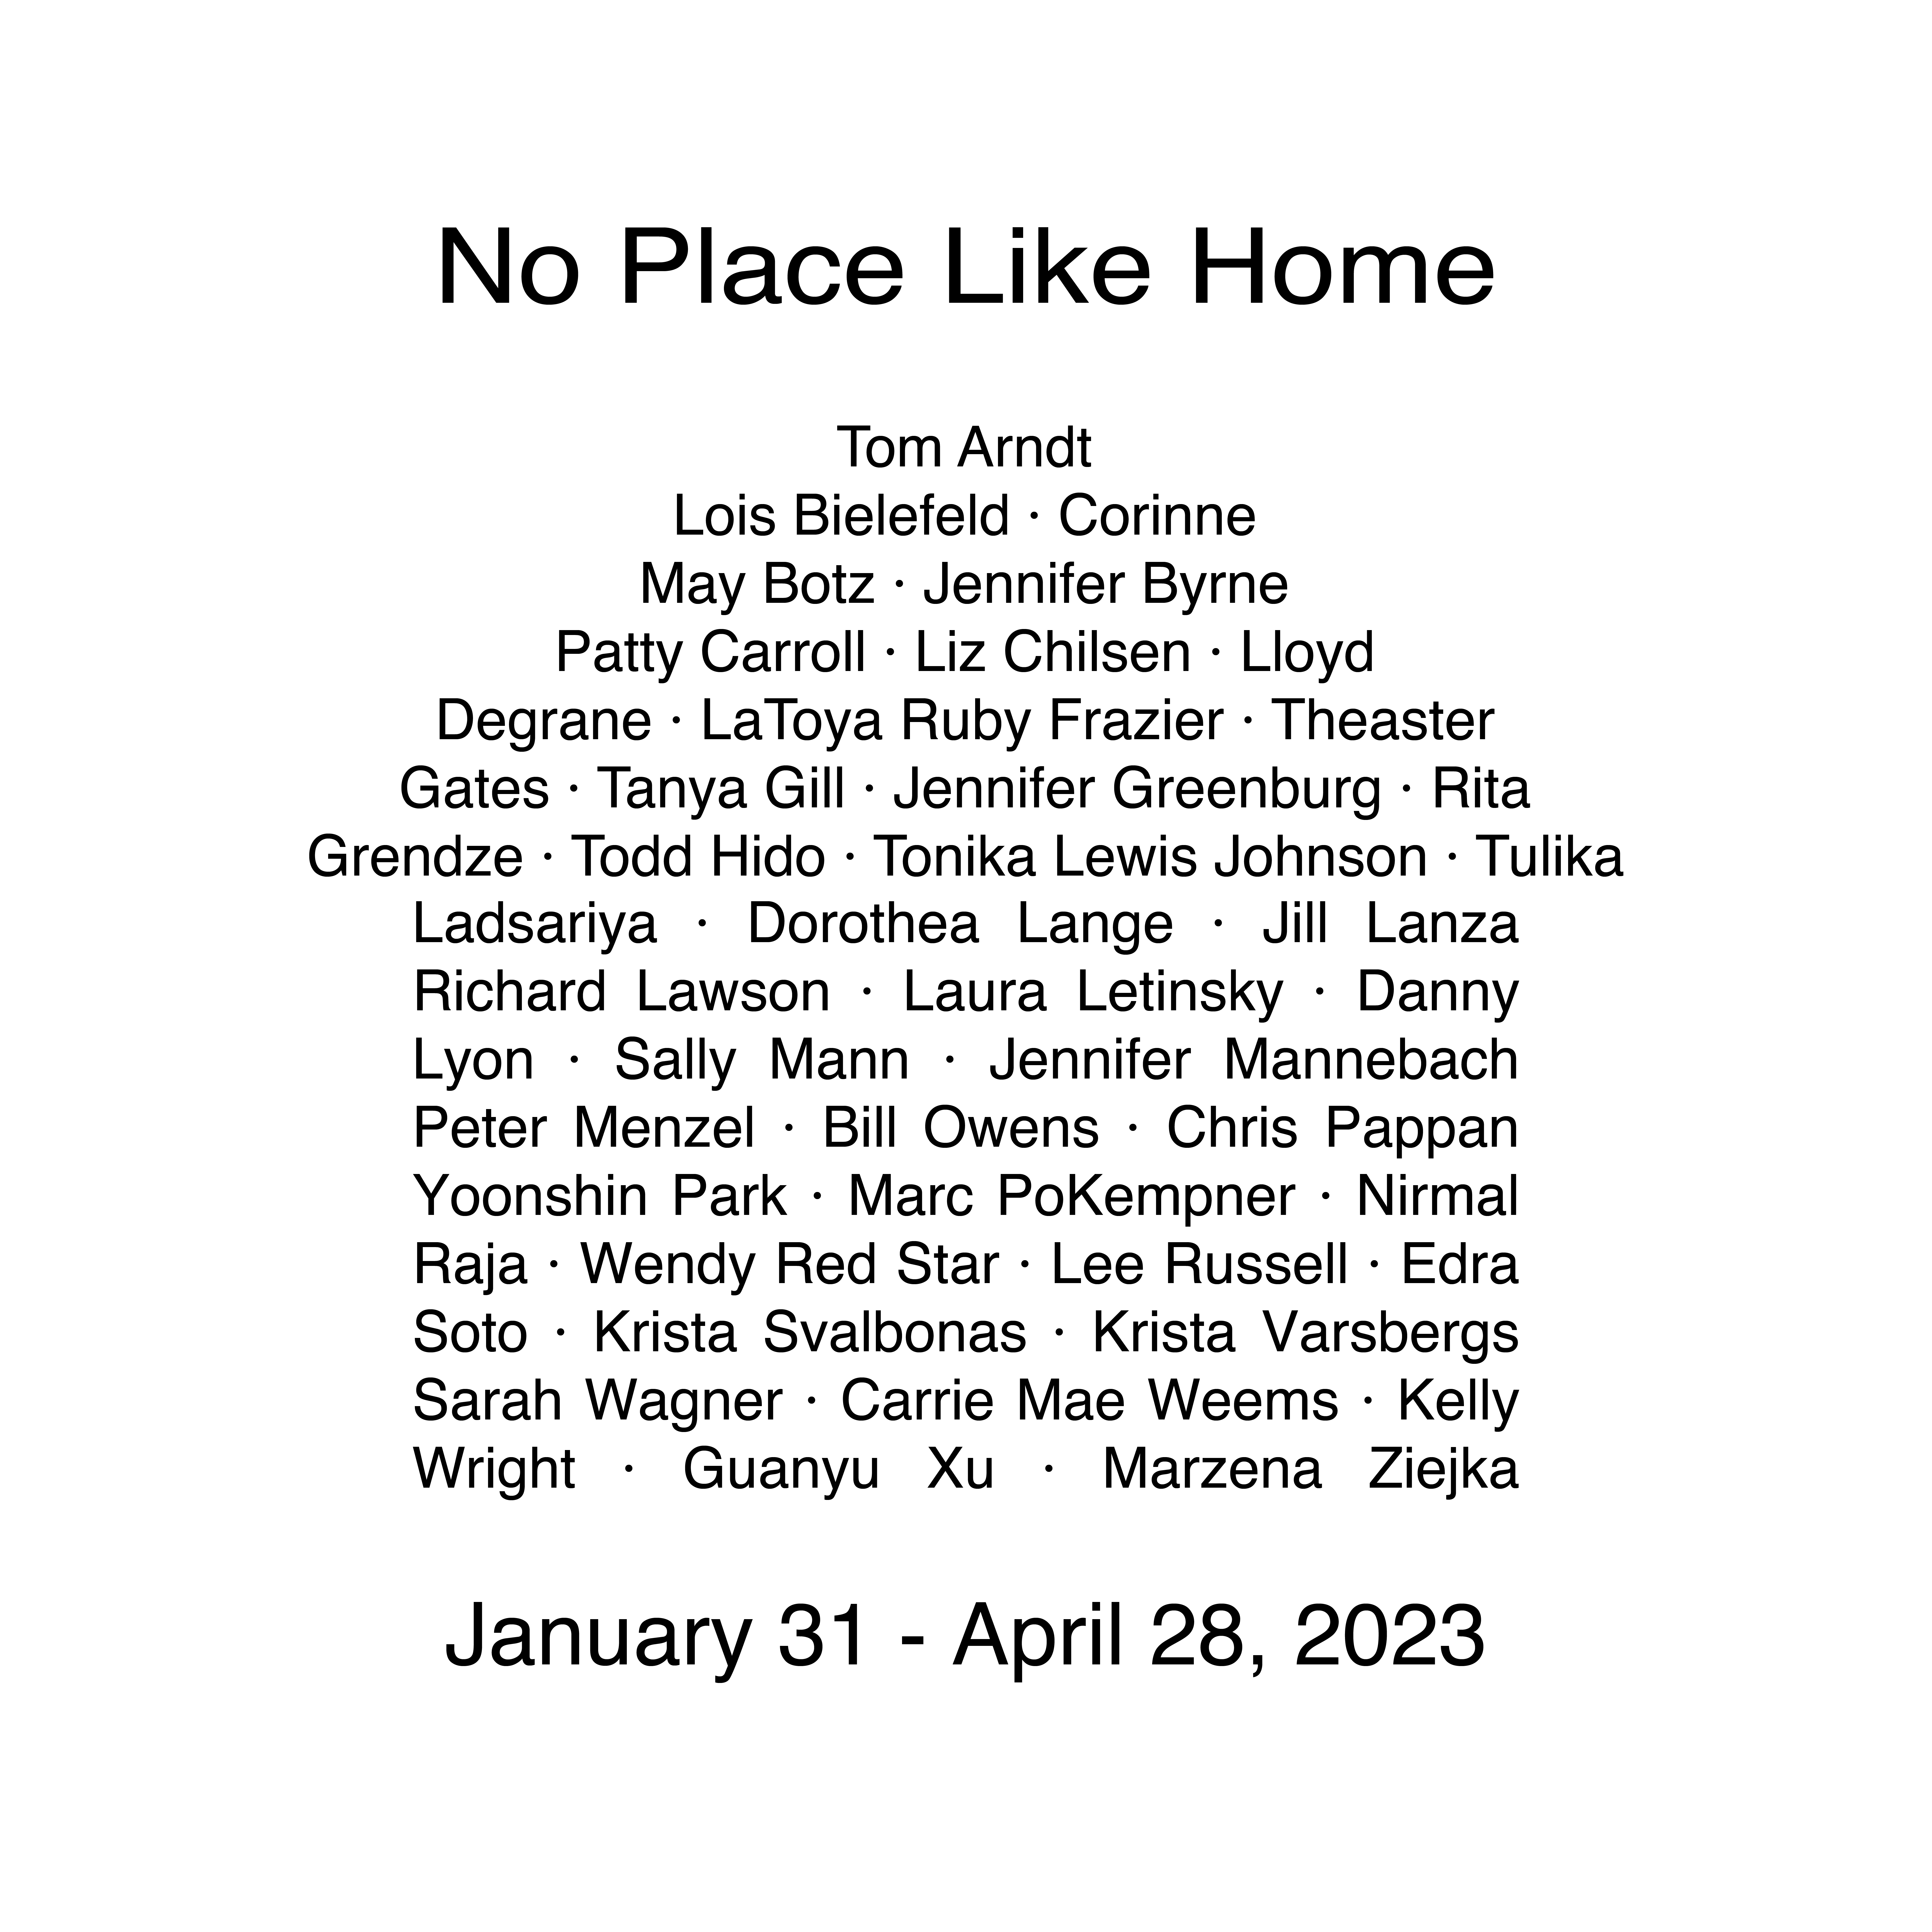 No Place Like Home Exhibition